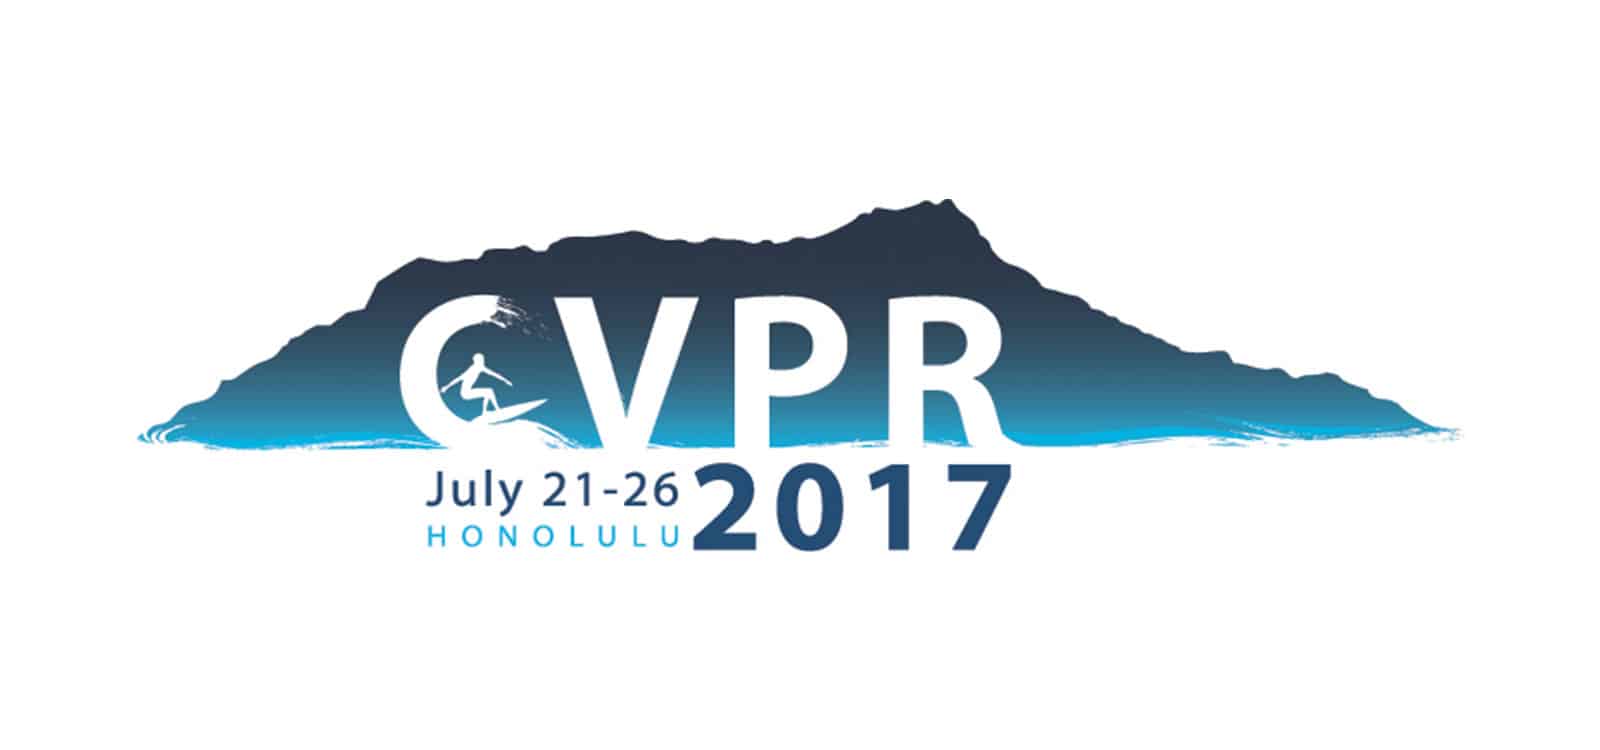 One of Our Ph.D.’s, Jared Heinly at the CVPR Conference 2017 | Stockpile Reports